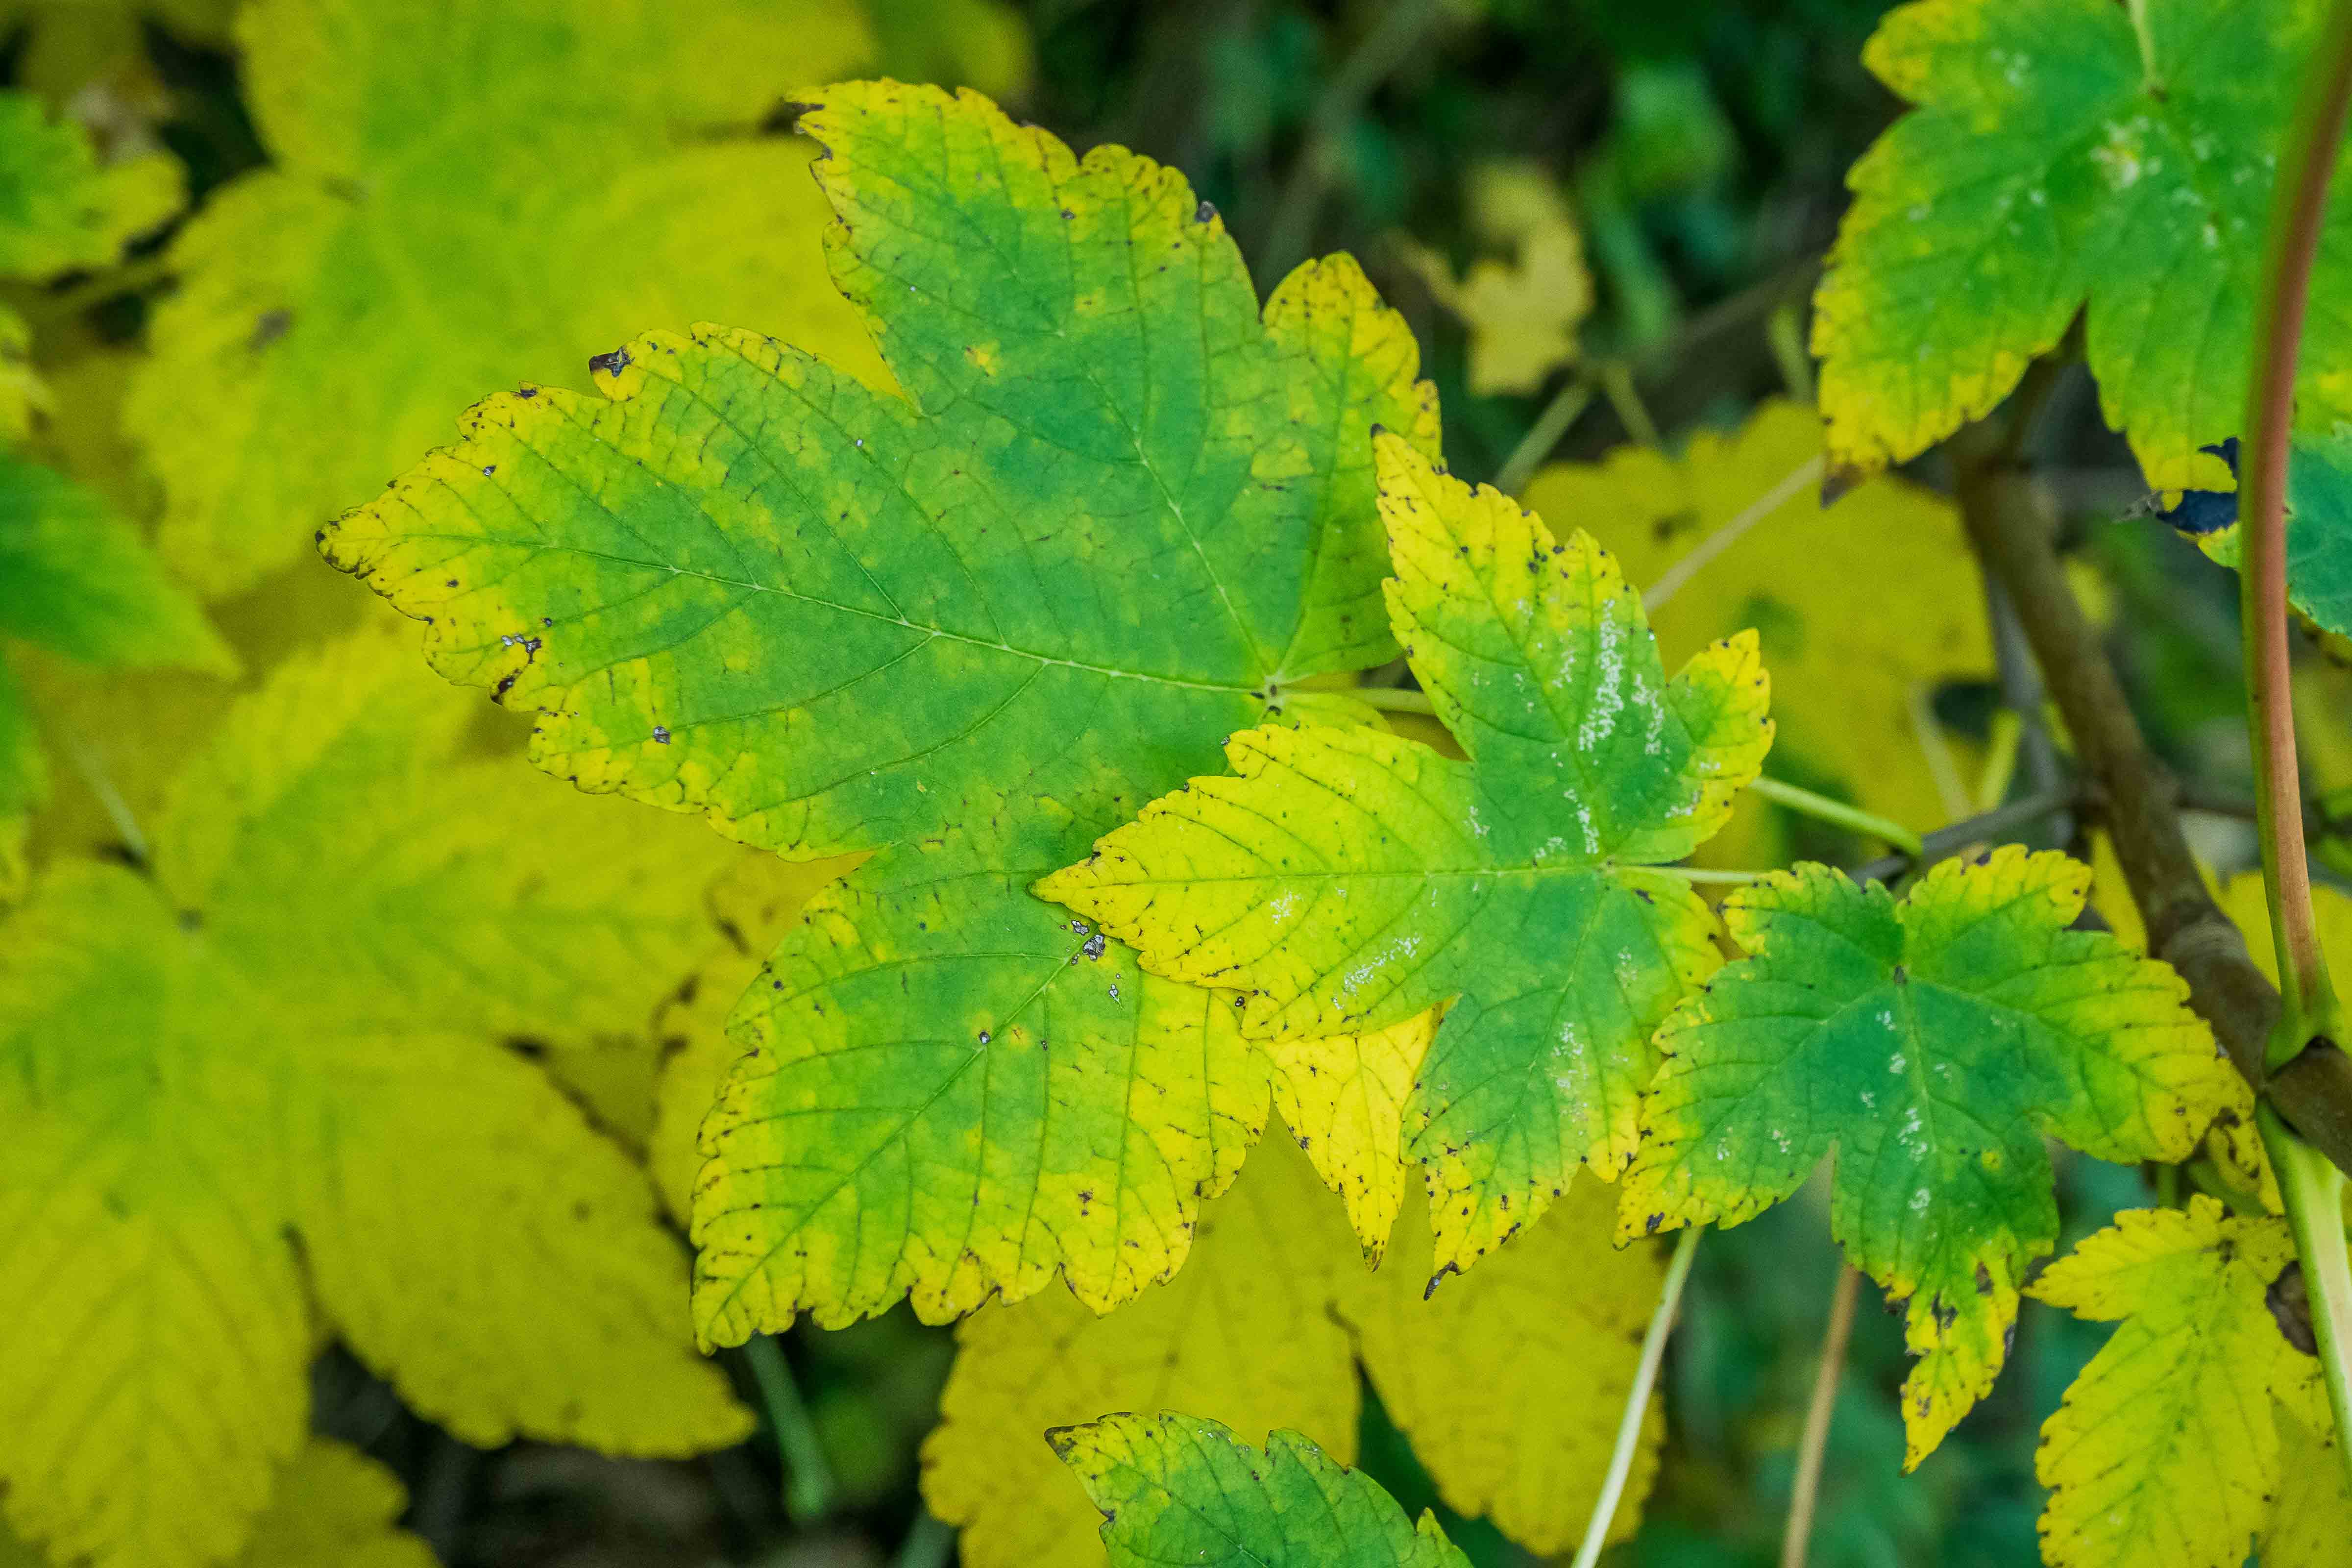 Sycamore leaves turning from green to yellow